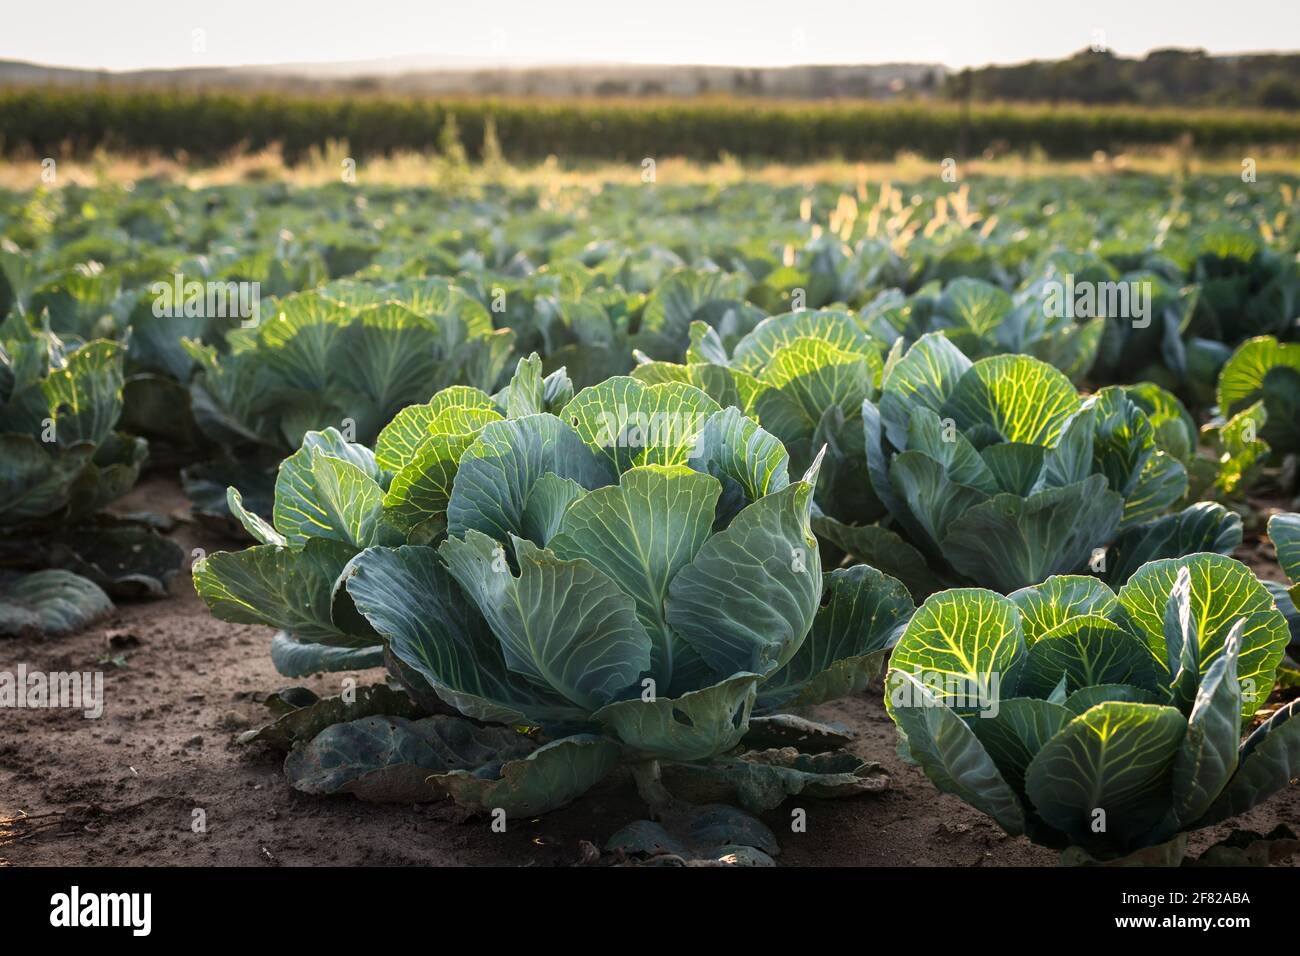 Cabbage vegetable at field. Organic farm or garden Stock Photo